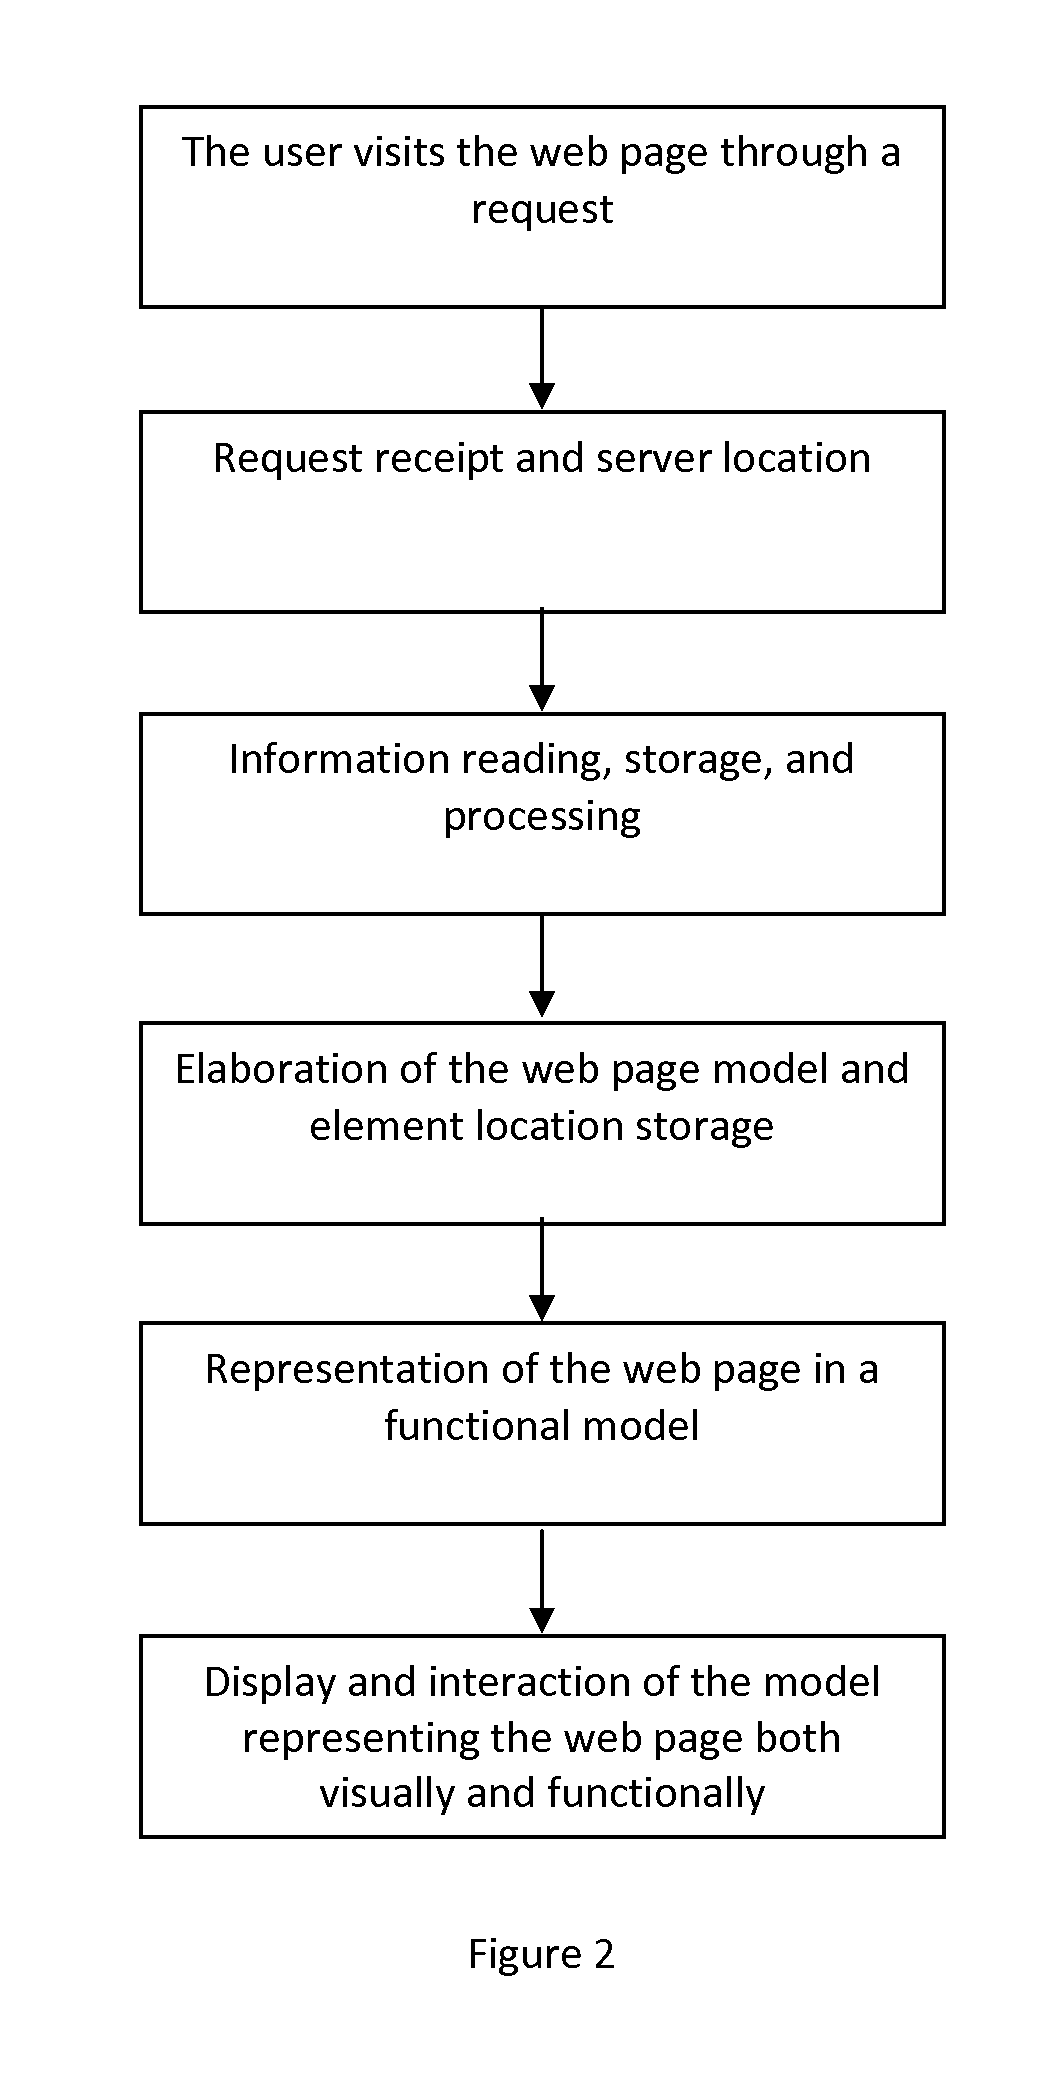 Method and system to build a representative model for web pages to interact with users